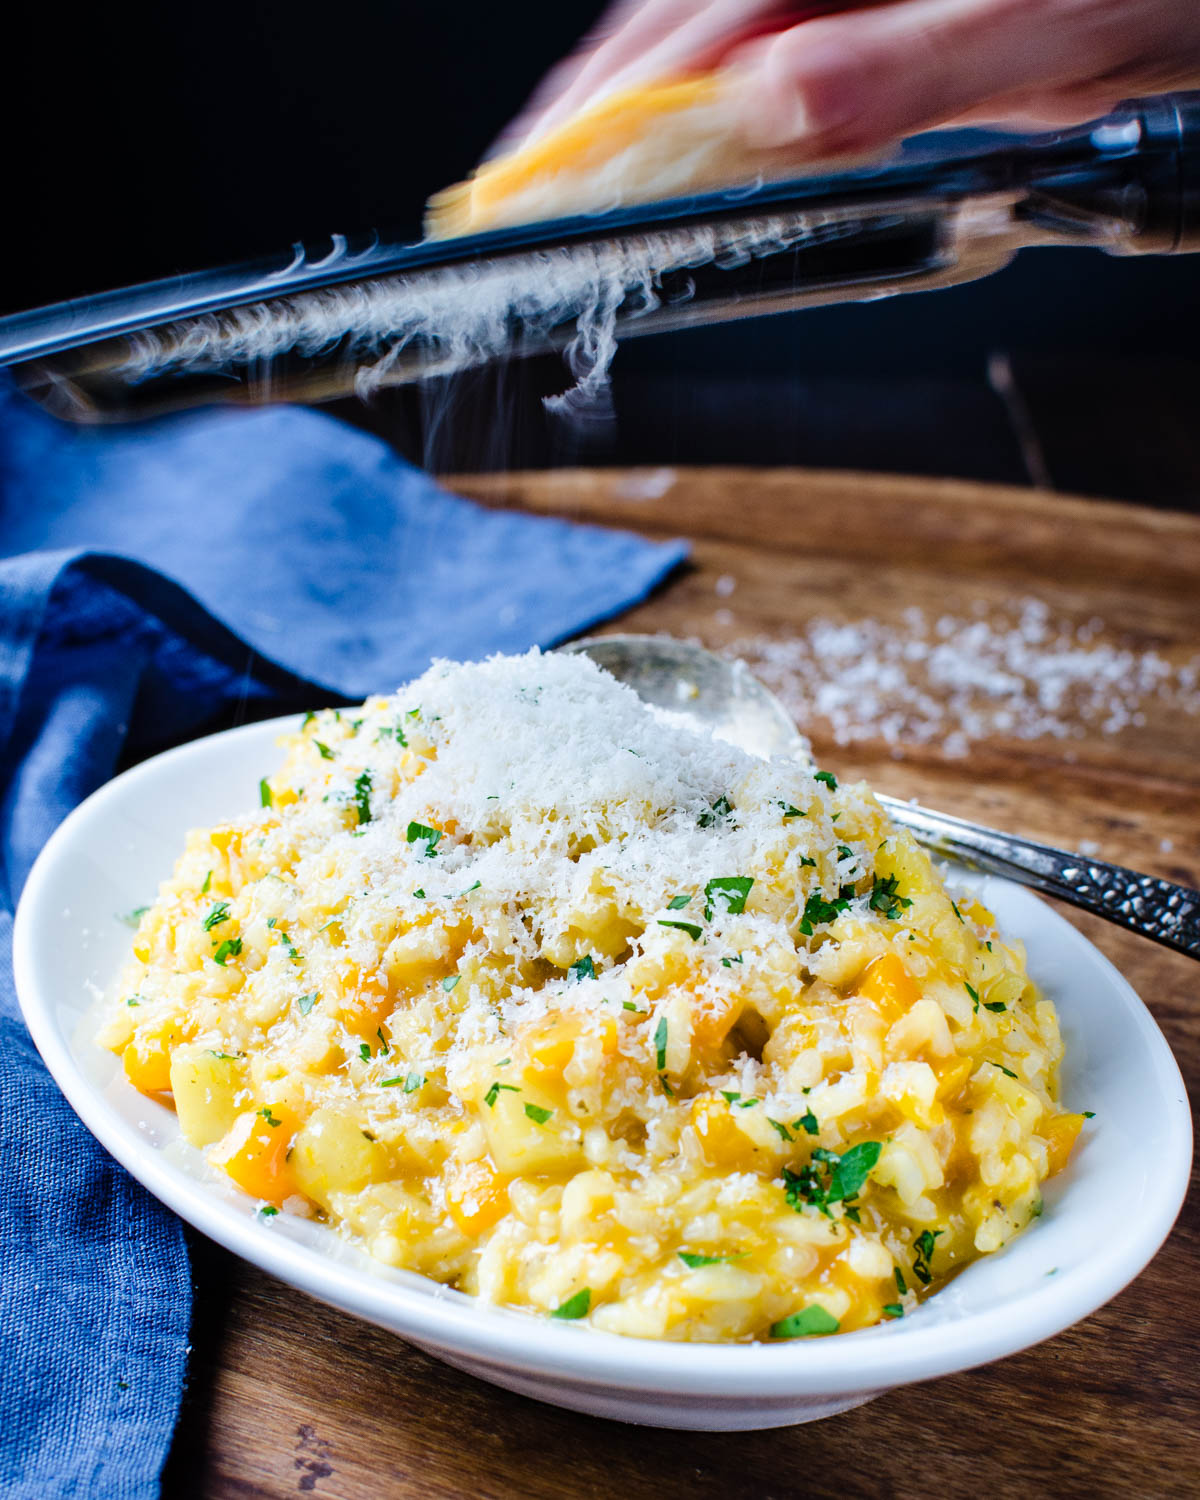 Adding extra parmesan cheese to the squash risotto platter.